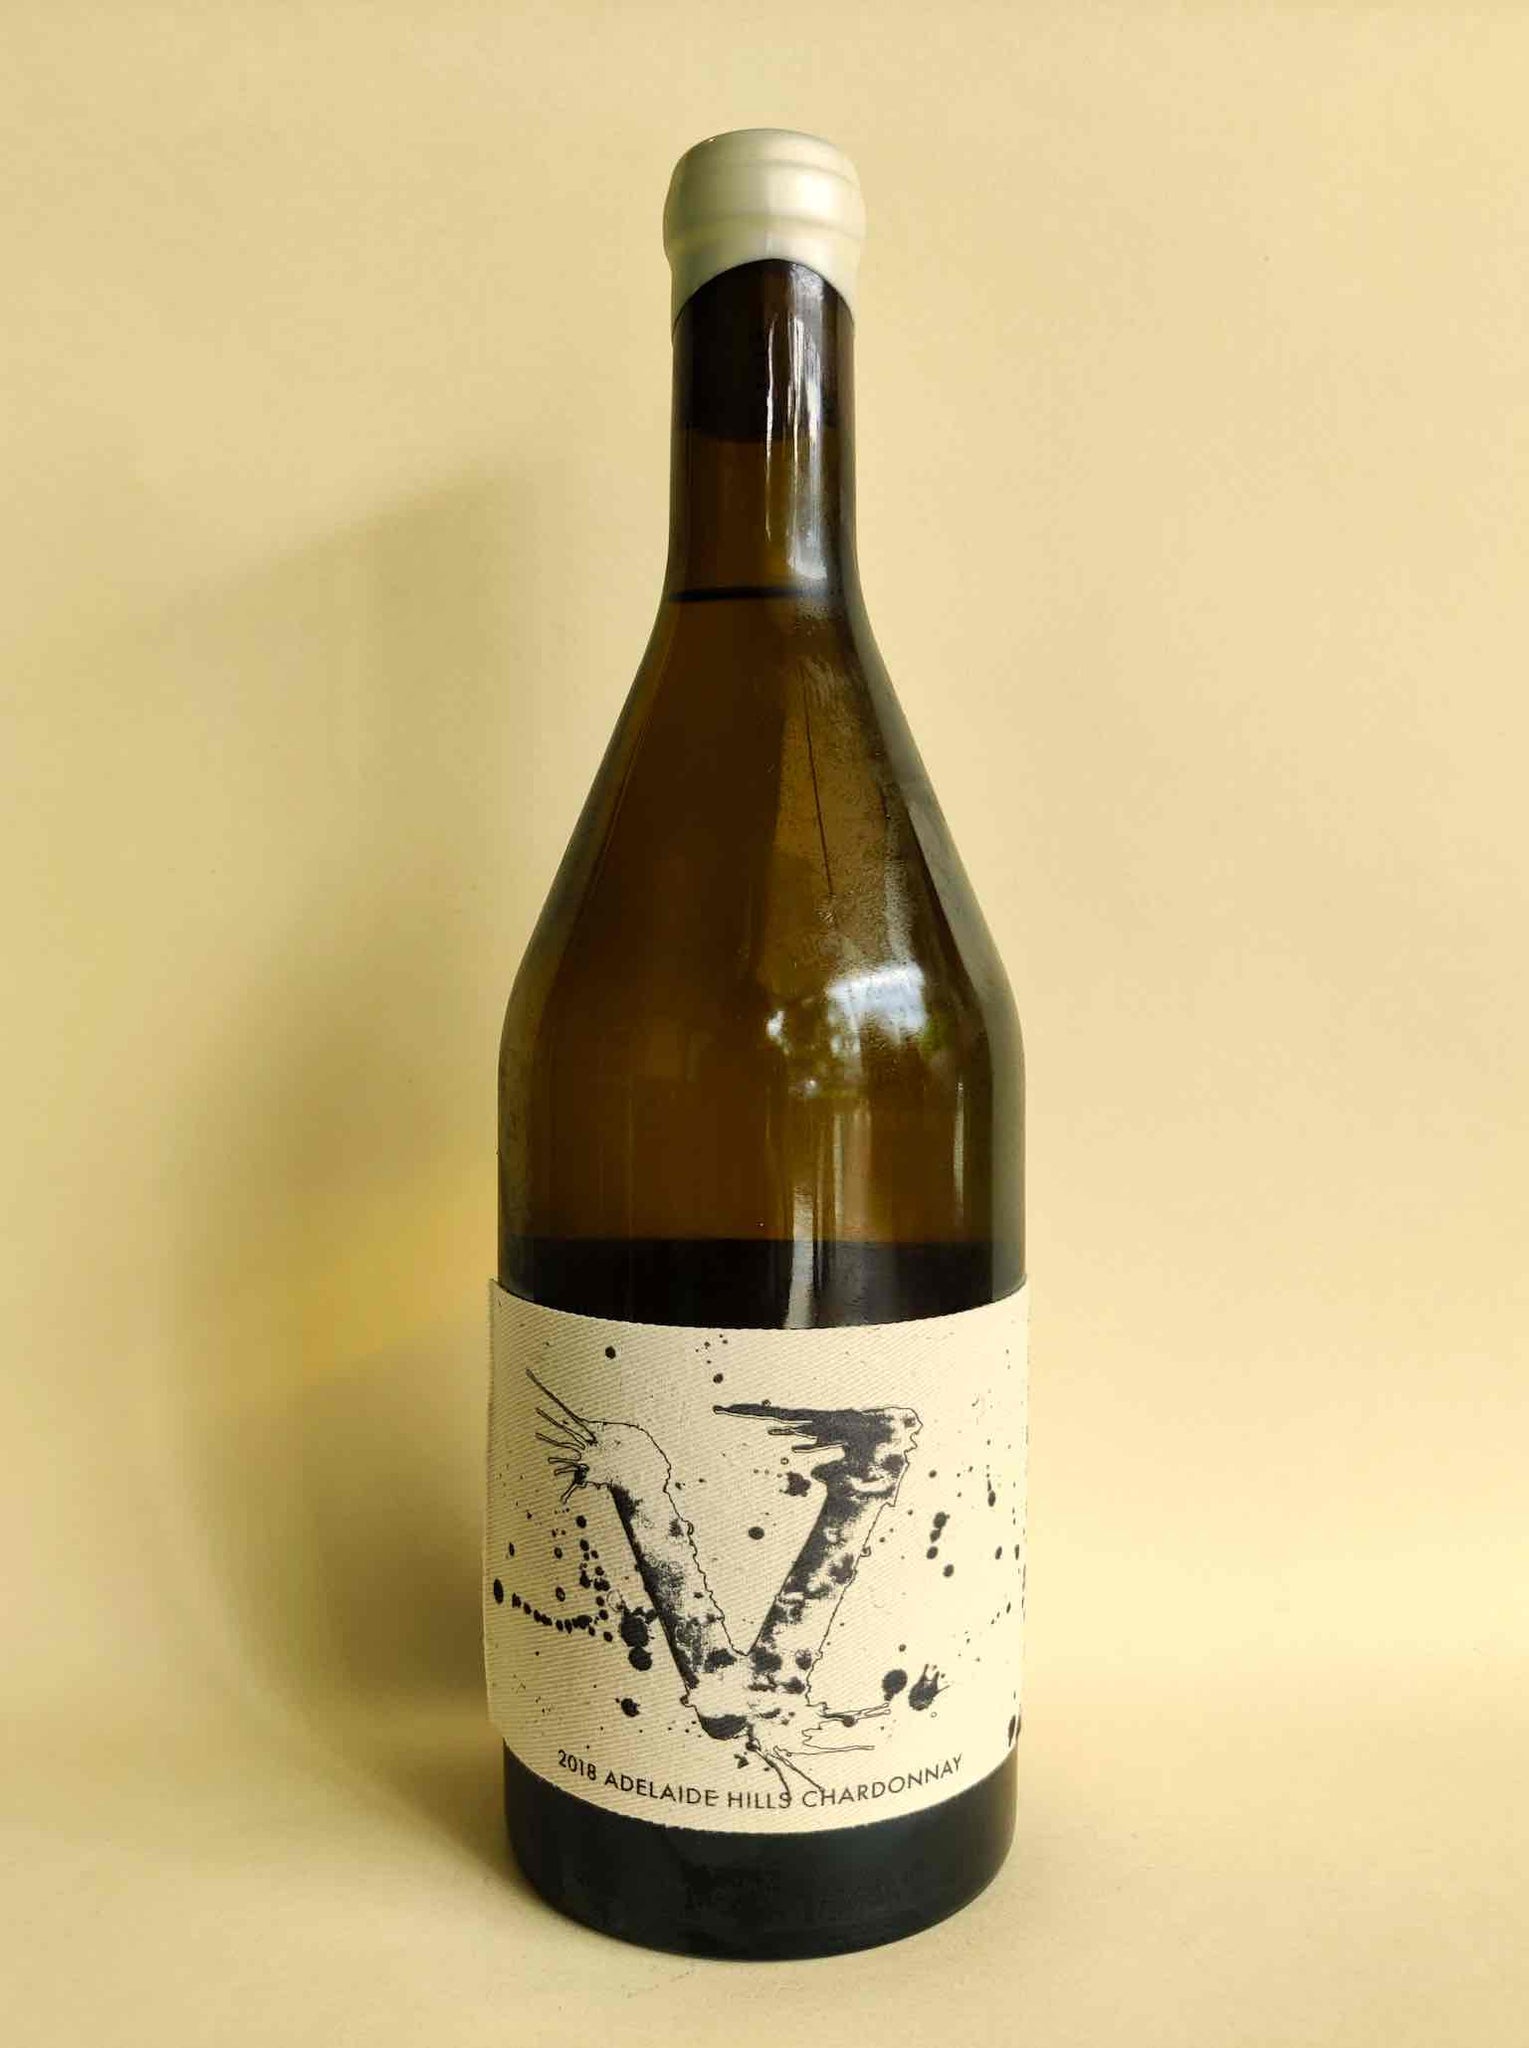 A bottle of 2018 Vanguardist Chardonnay from the Adelaide Hills, South Australia. 